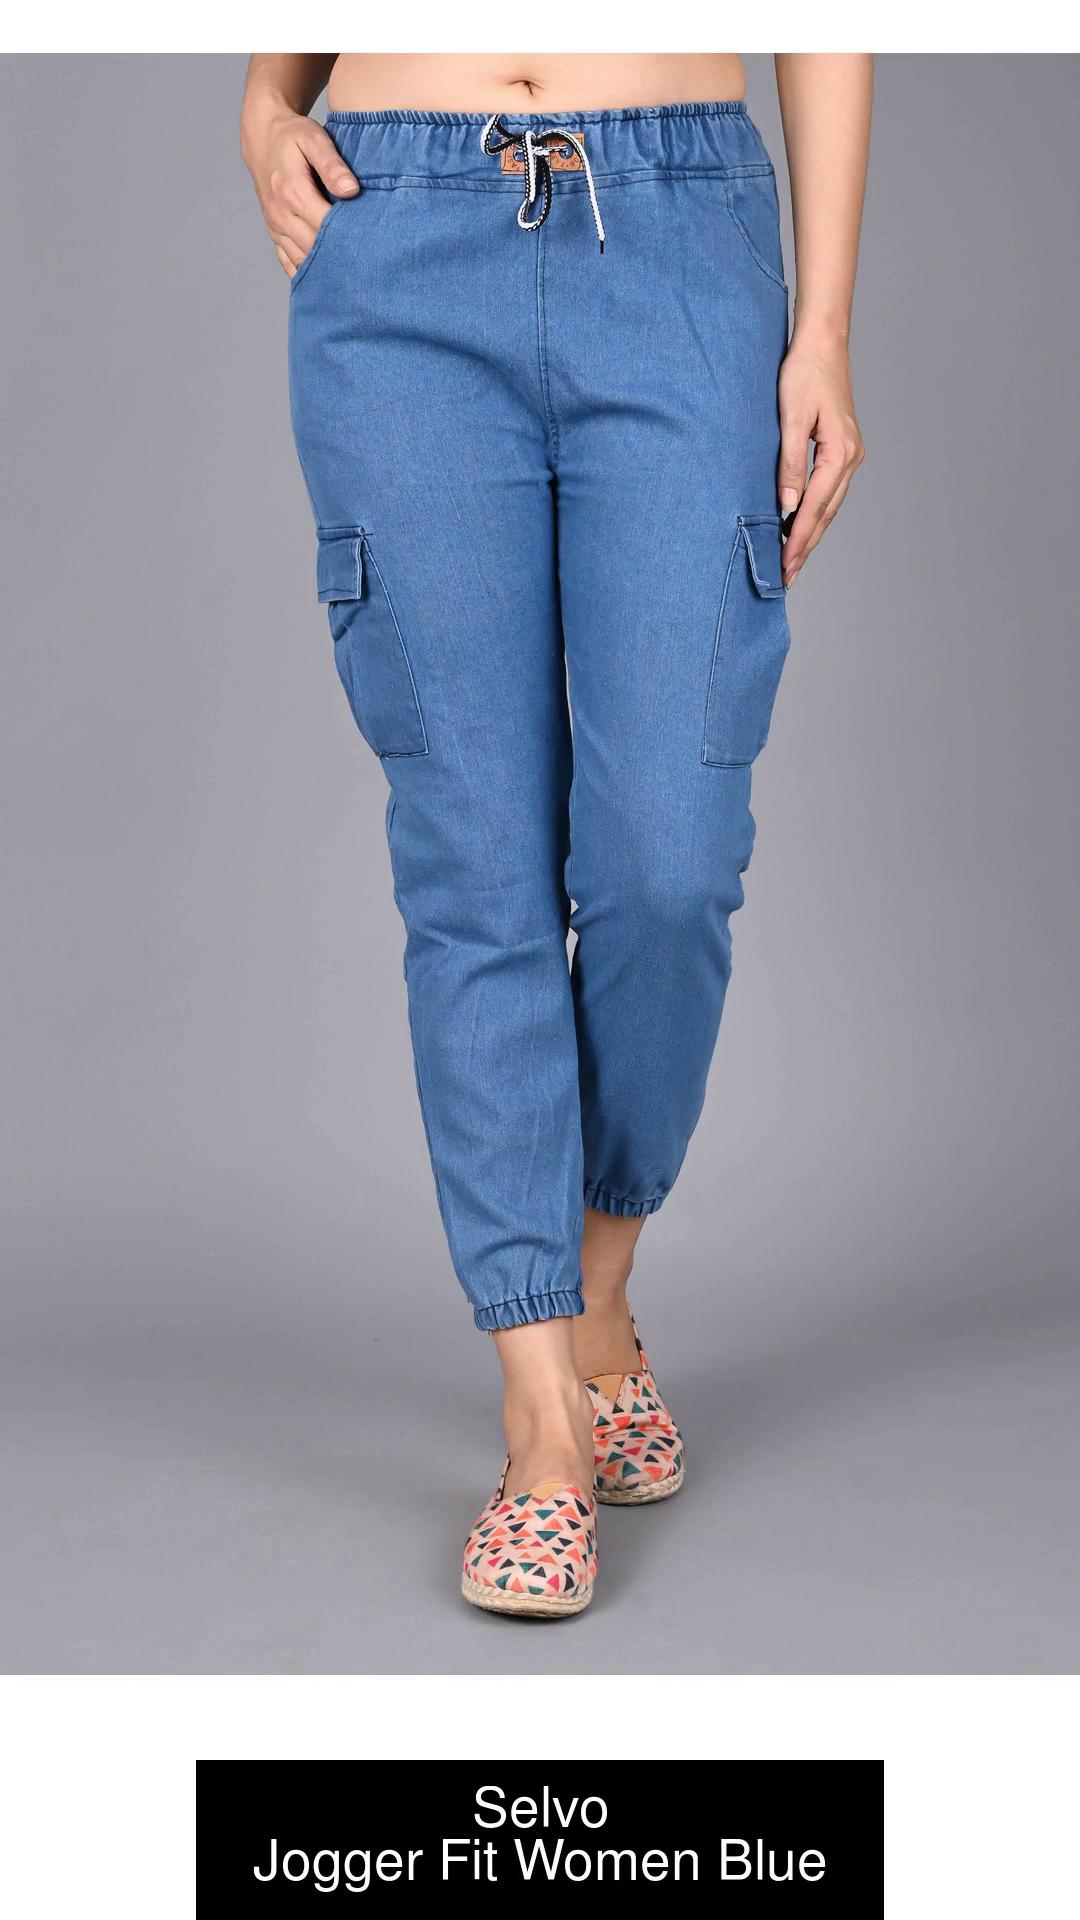 Selvo Jogger Fit Women Blue Jeans - Buy Selvo Jogger Fit Women Blue Jeans  Online at Best Prices in India